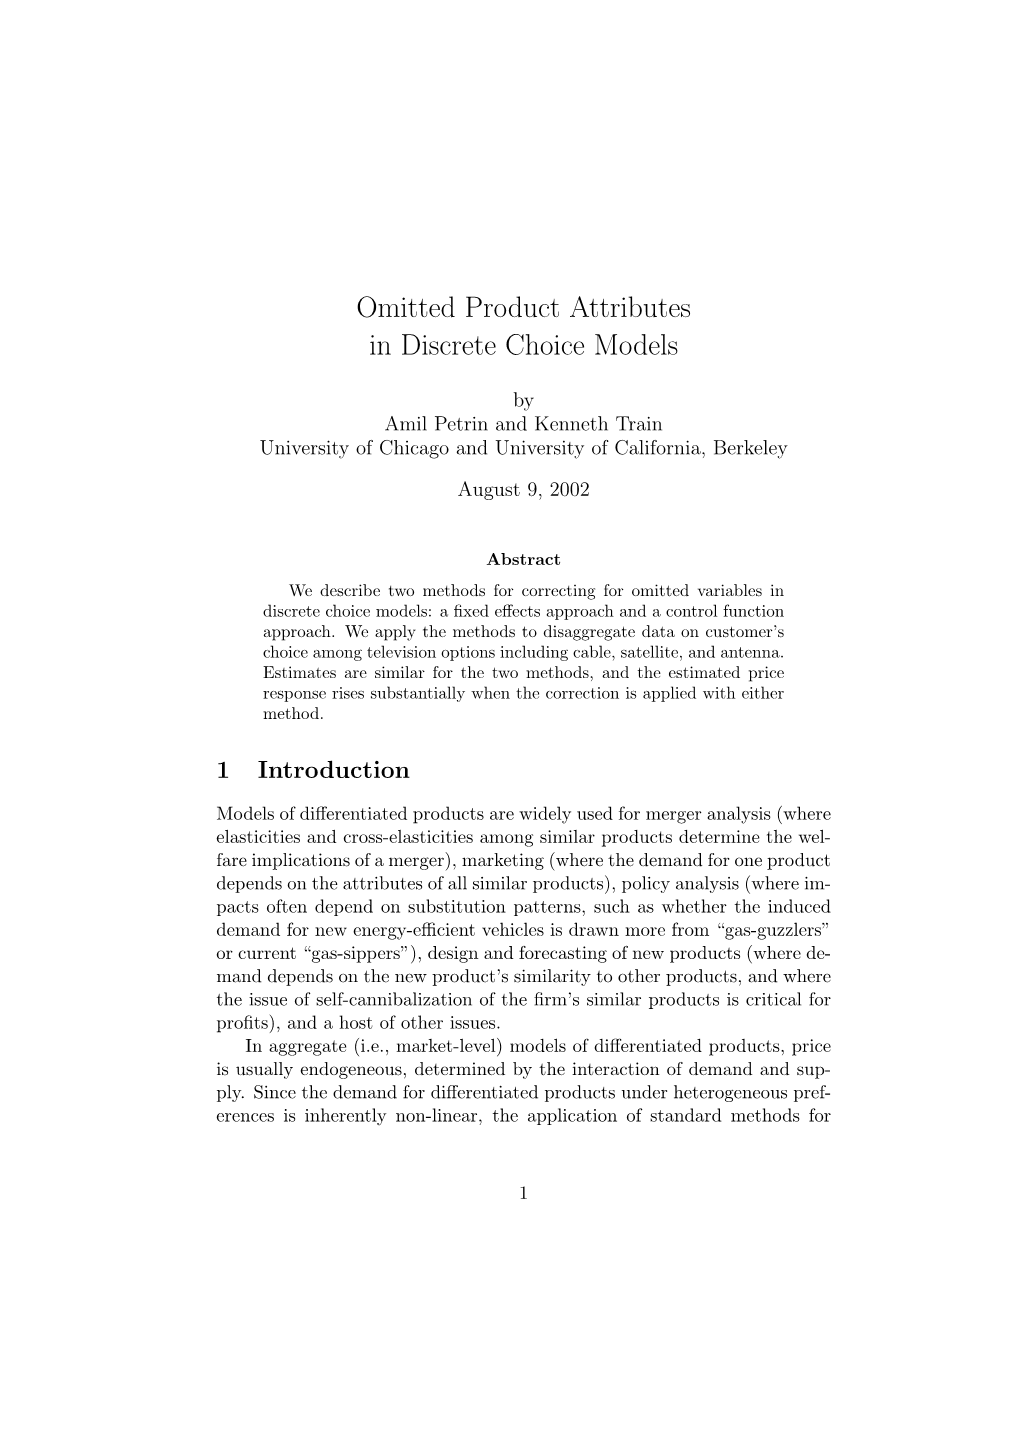 Omitted Product Attributes in Discrete Choice Models